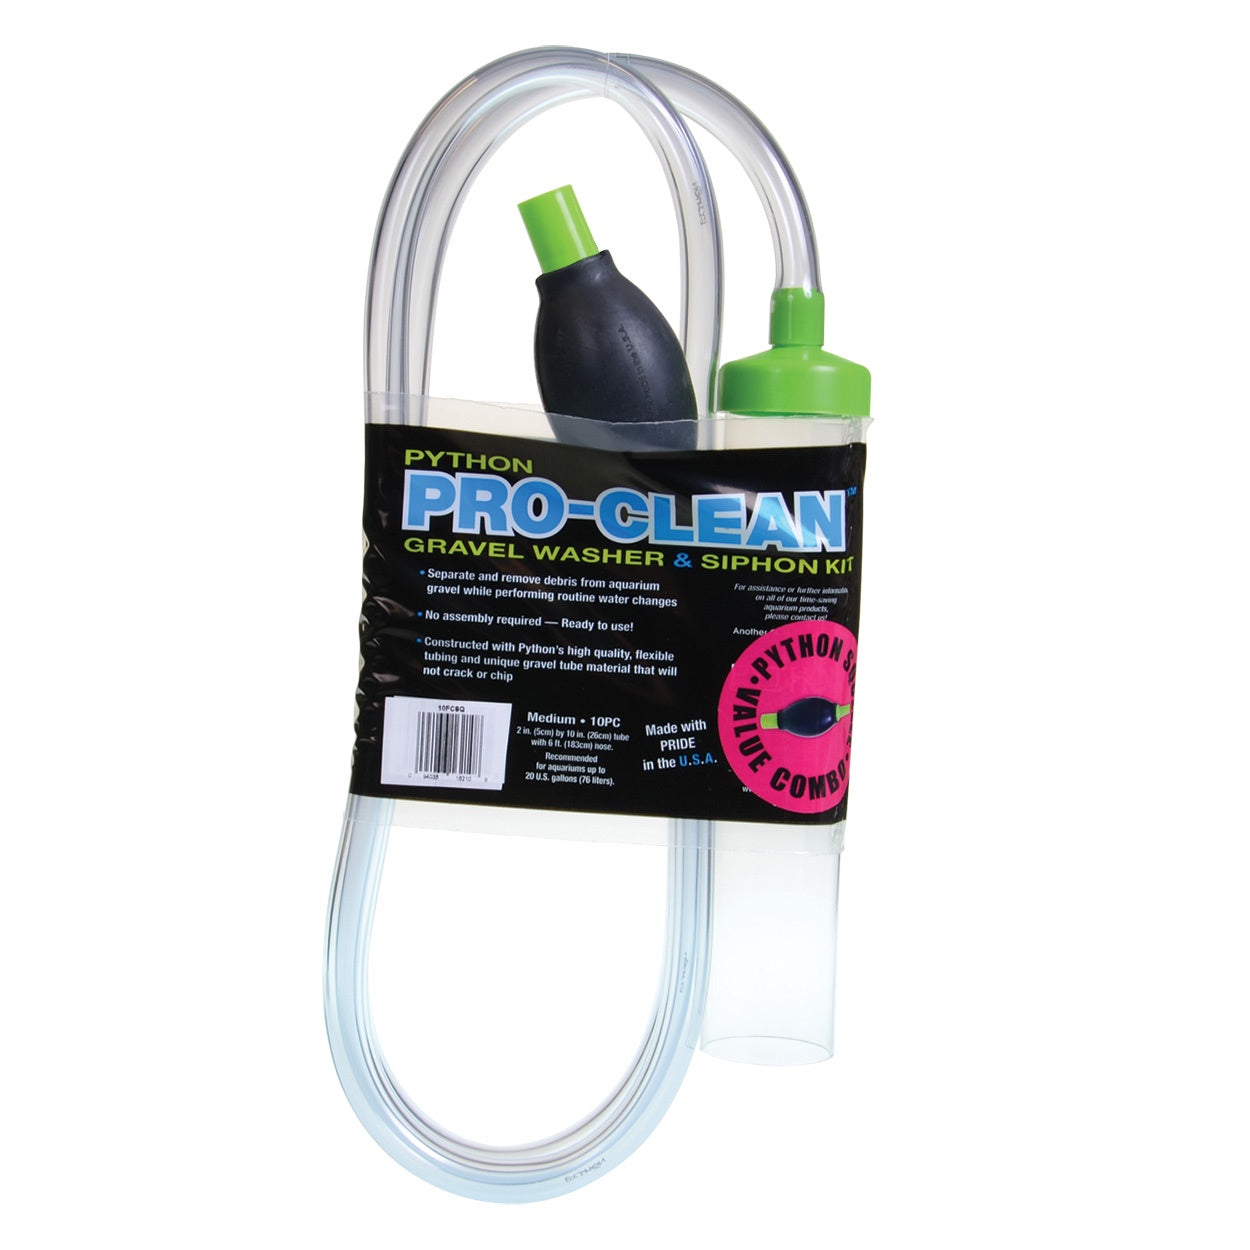 Pro-Clean Gravel Washer & Siphon Kit with Squeeze - Medium